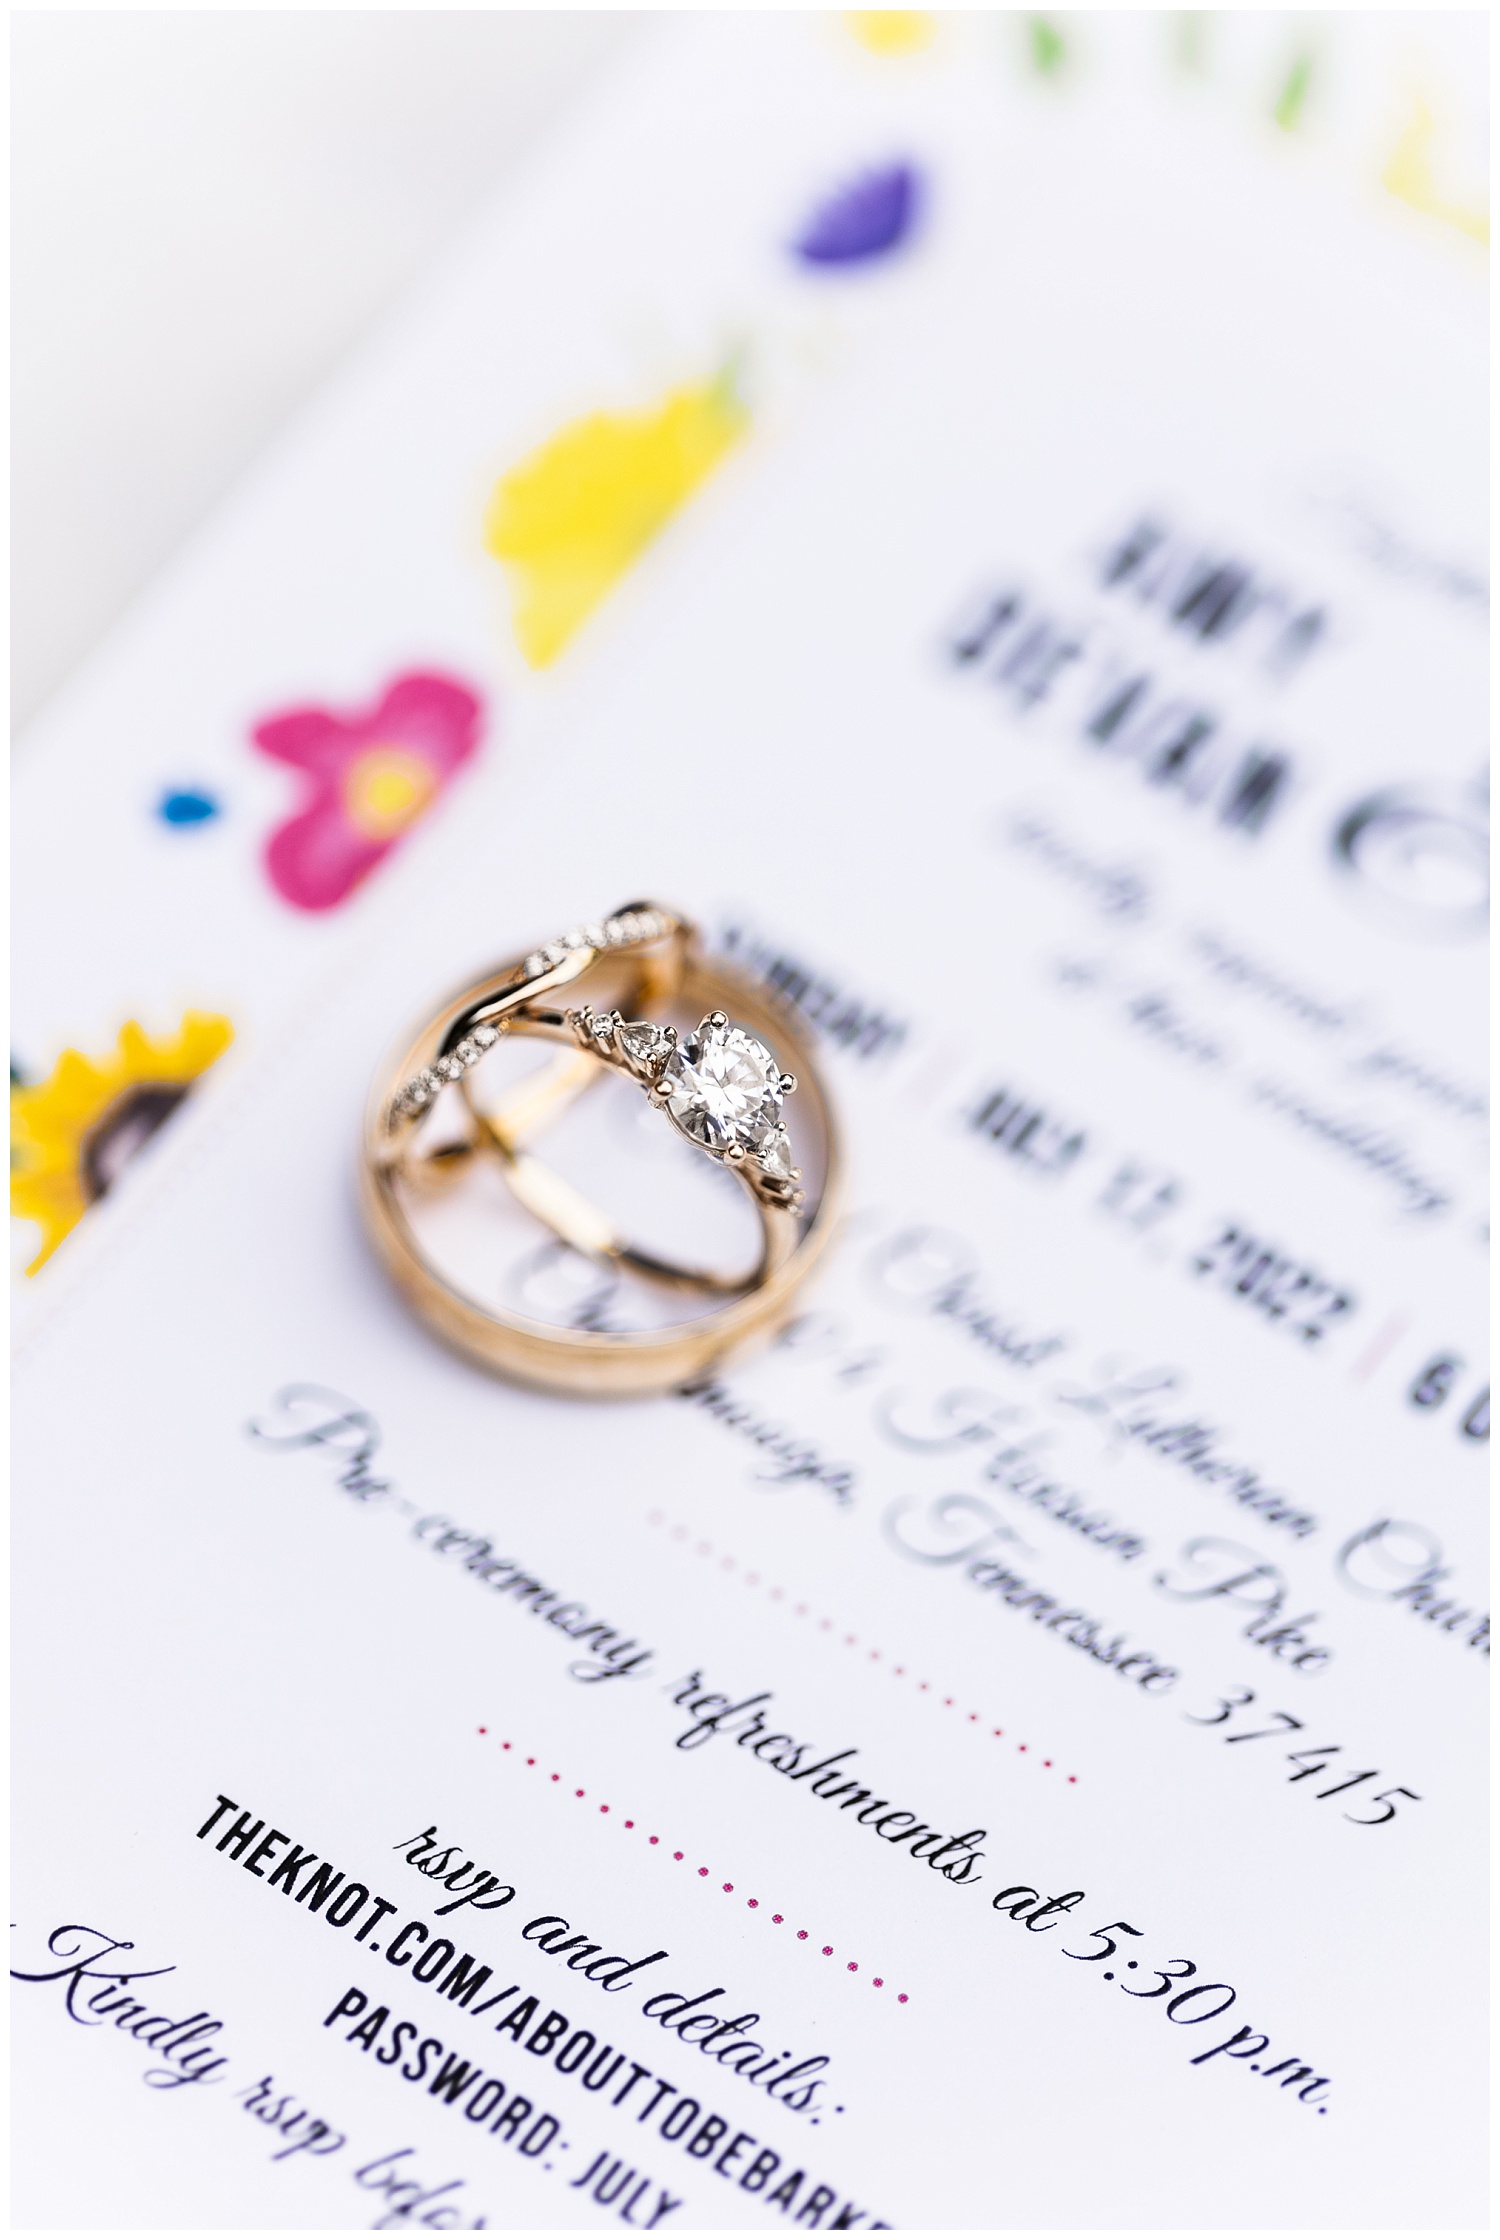 wedding rings sitting stacked on top of invitation